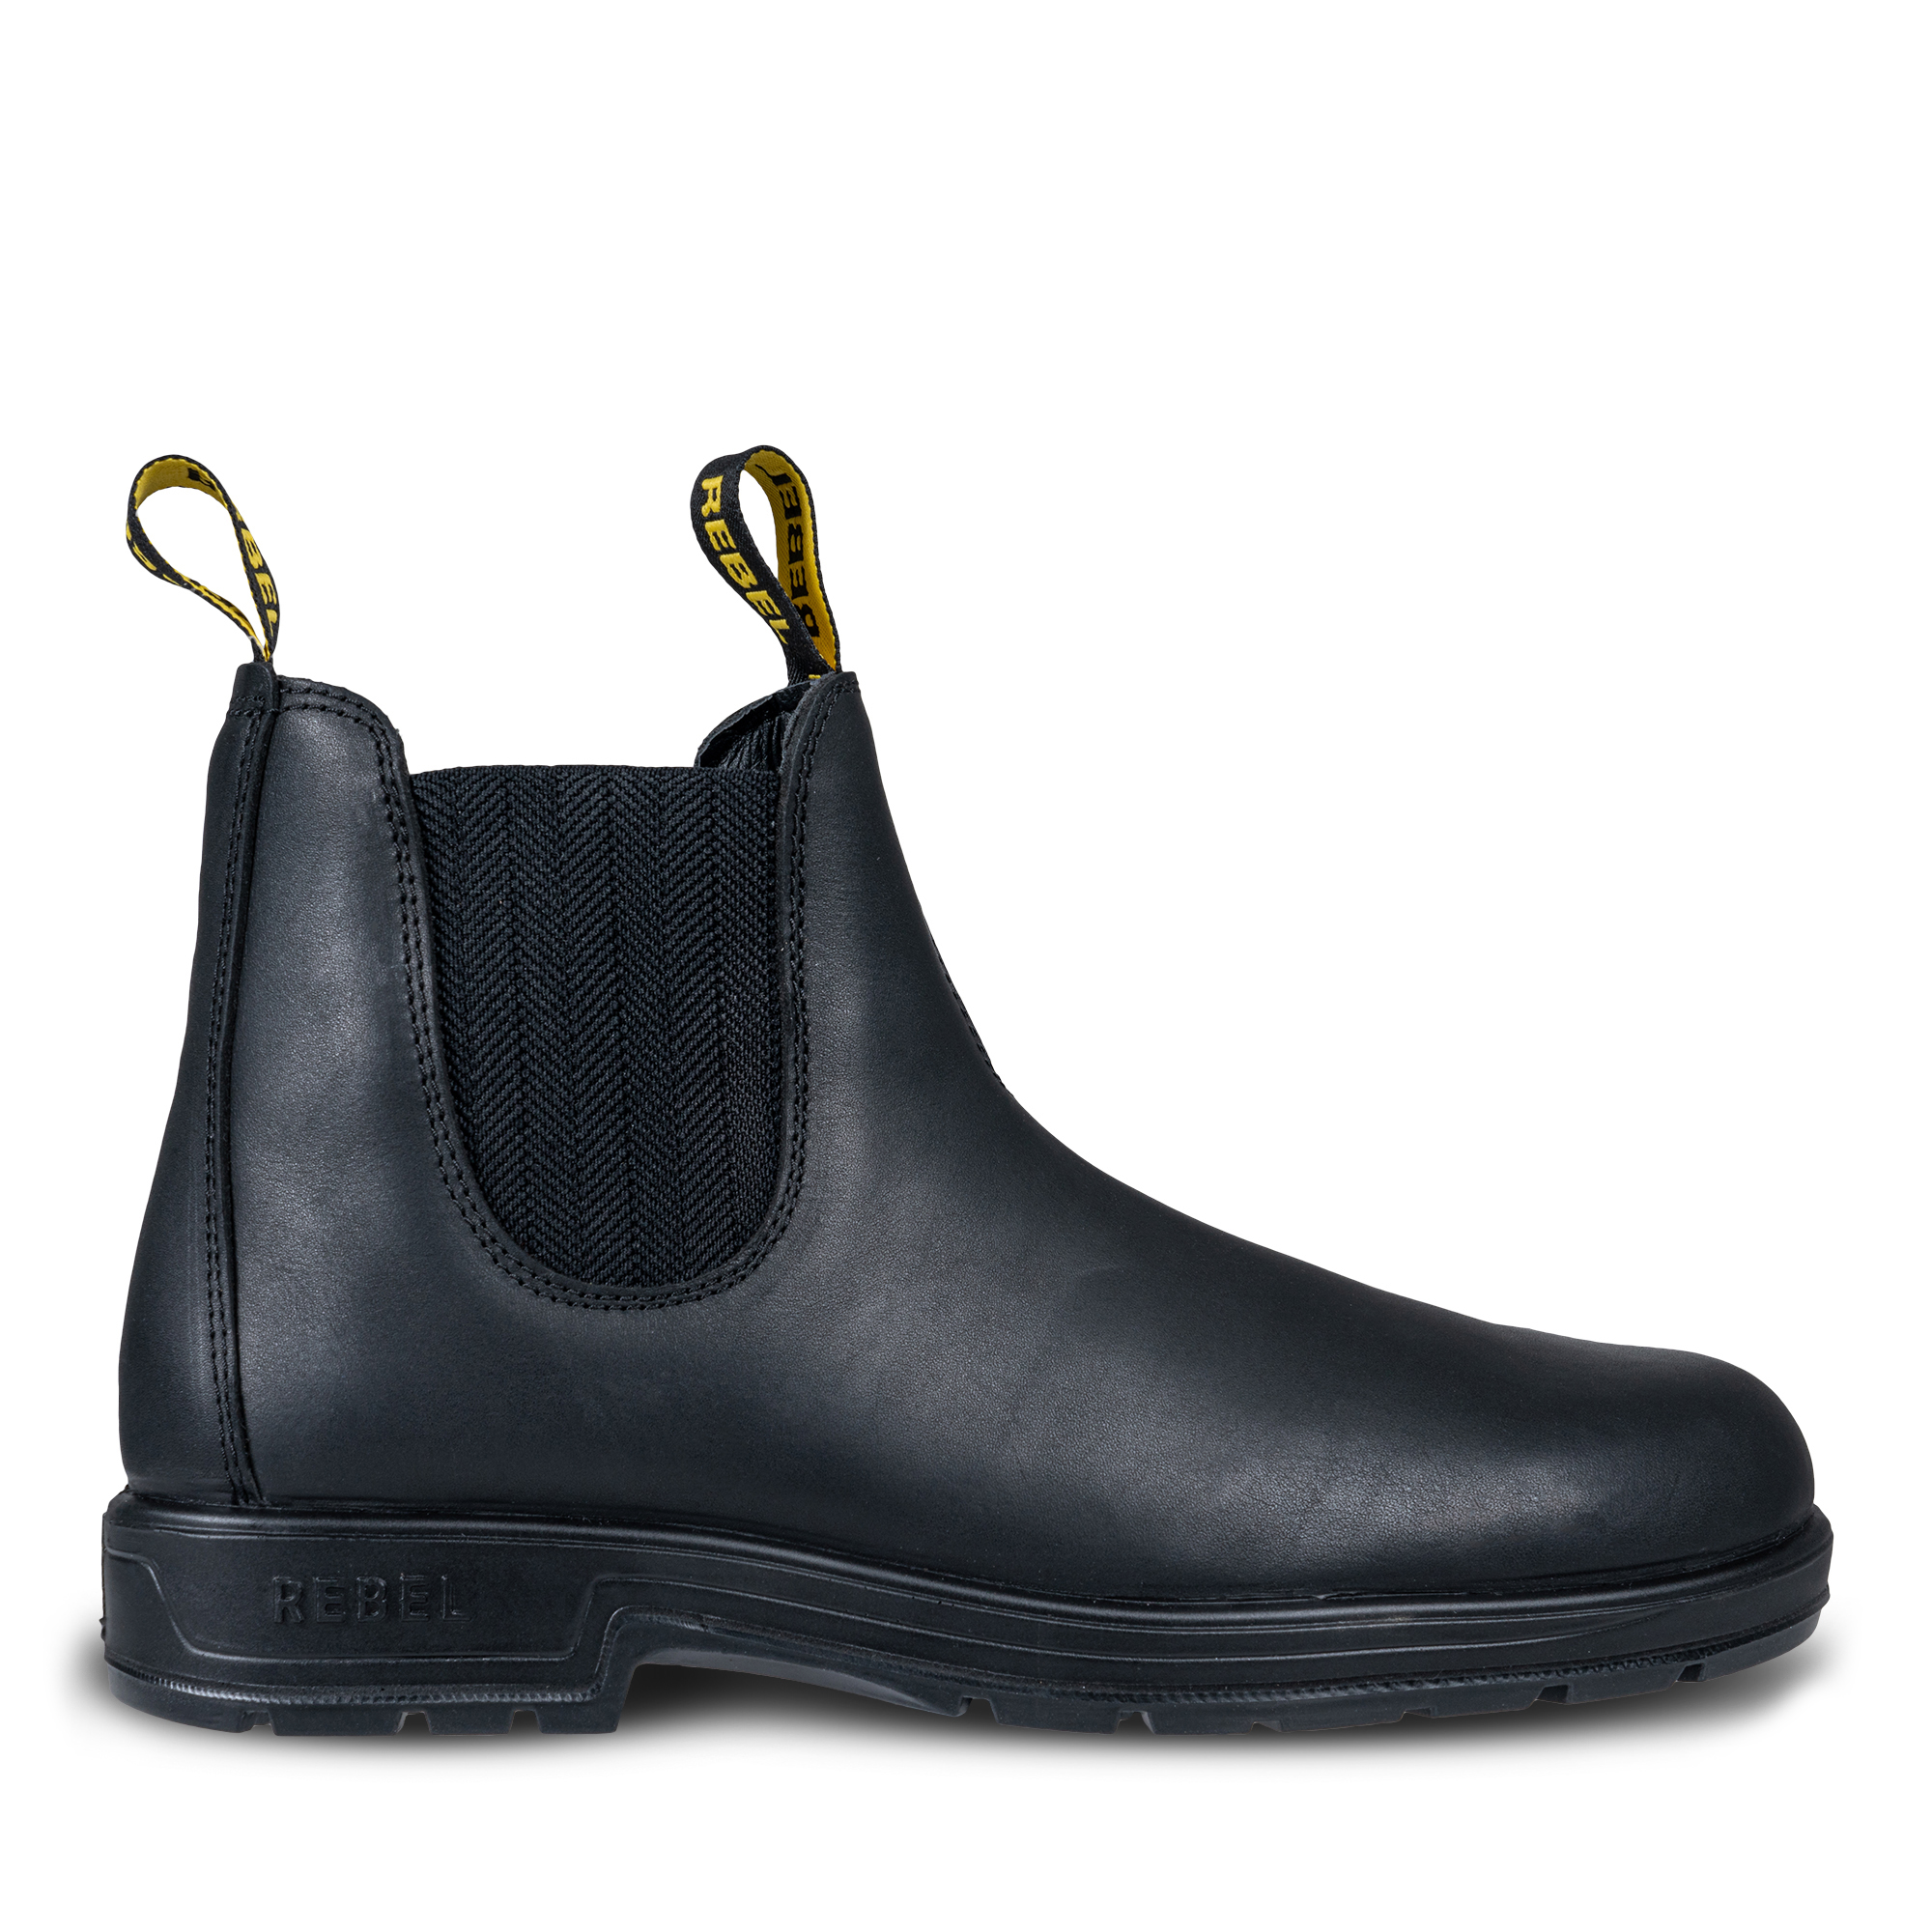 RSG_New_Chelsea_Boot_Black_With_Shadow_low